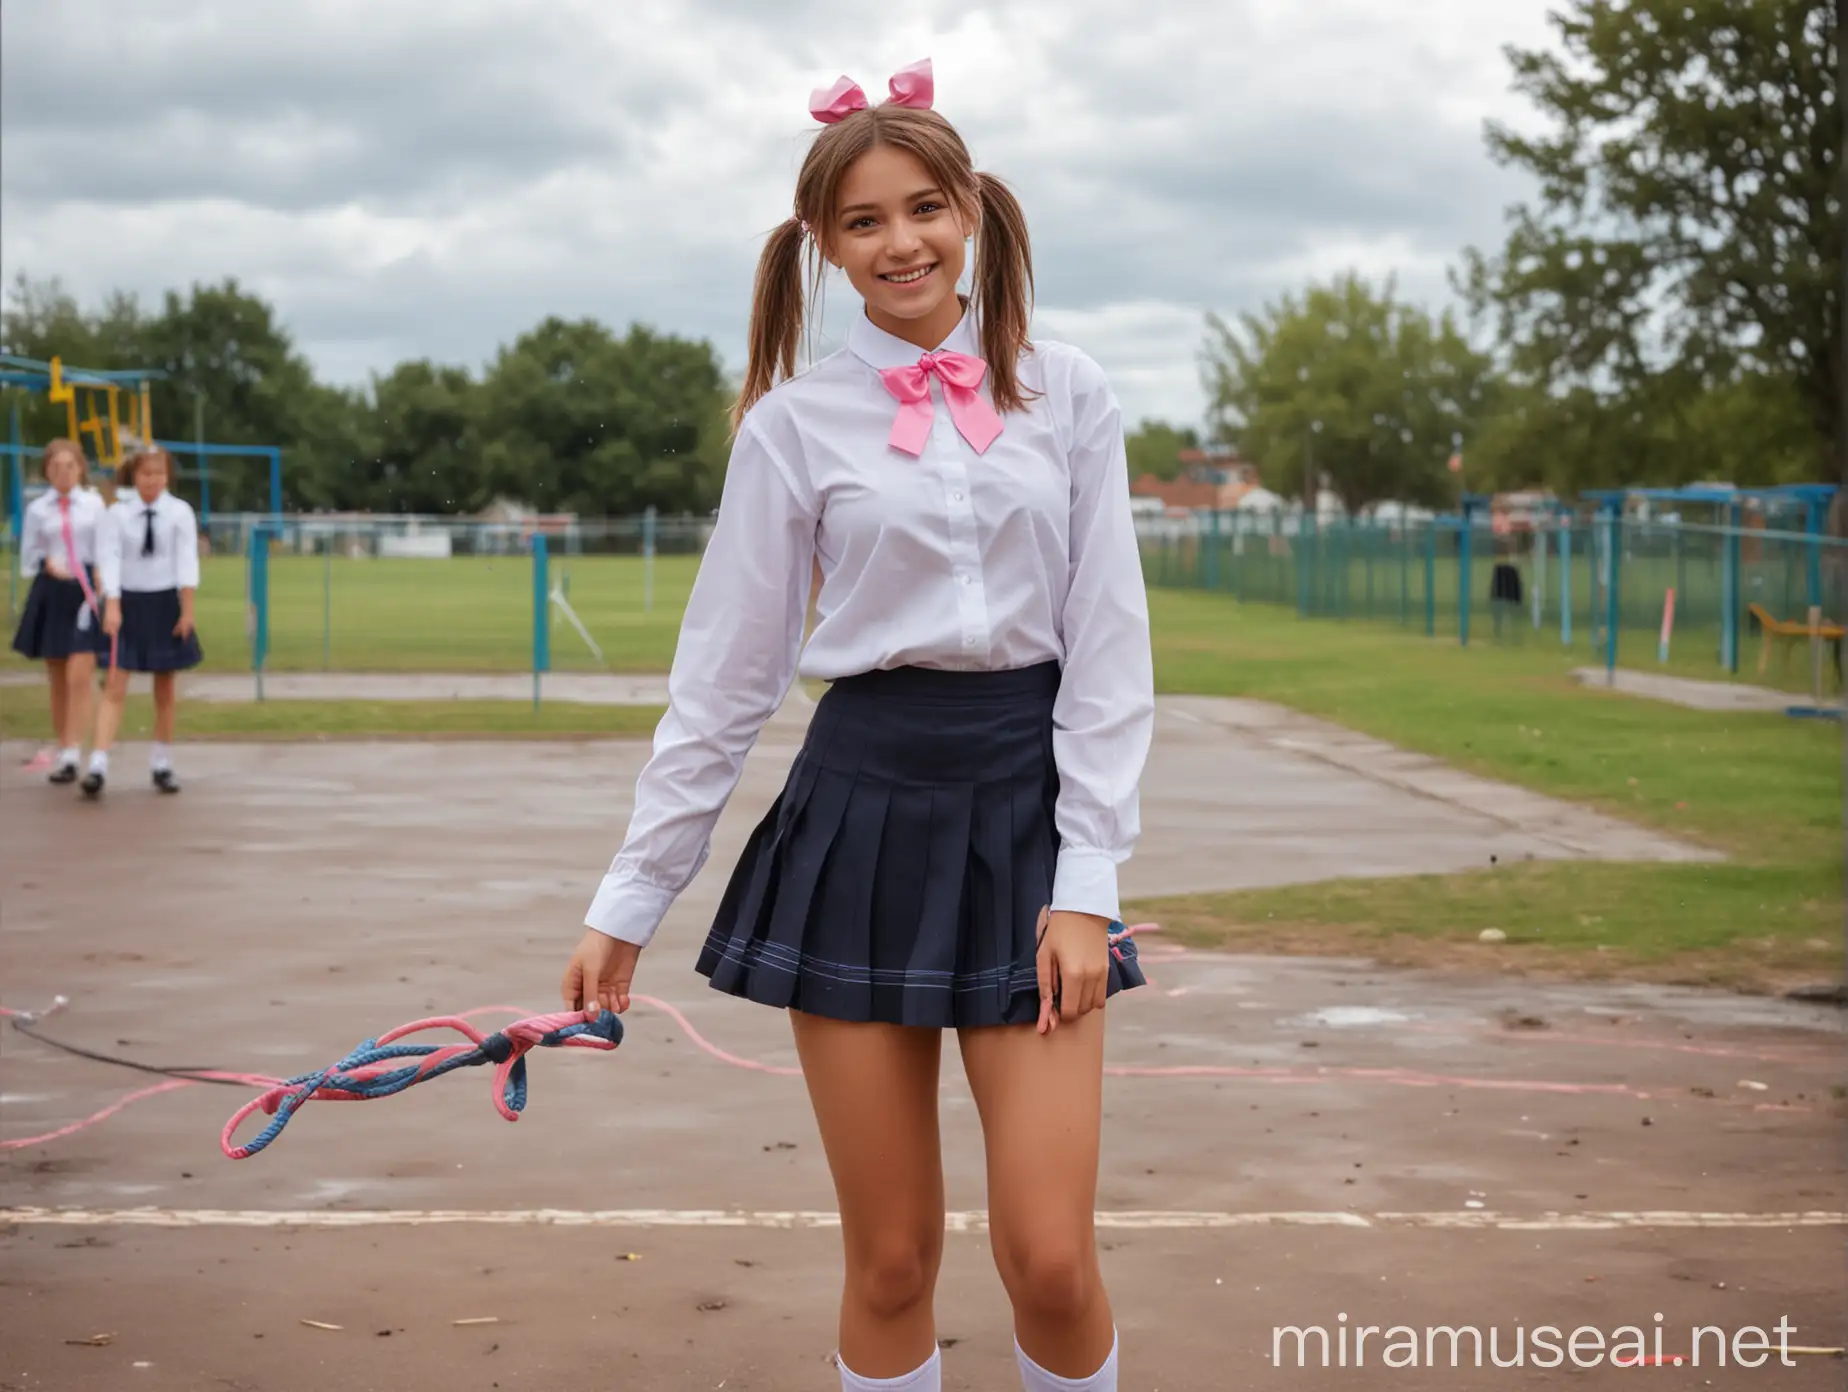 School Girl in Uniform with Skipping Rope on a Rainy Day